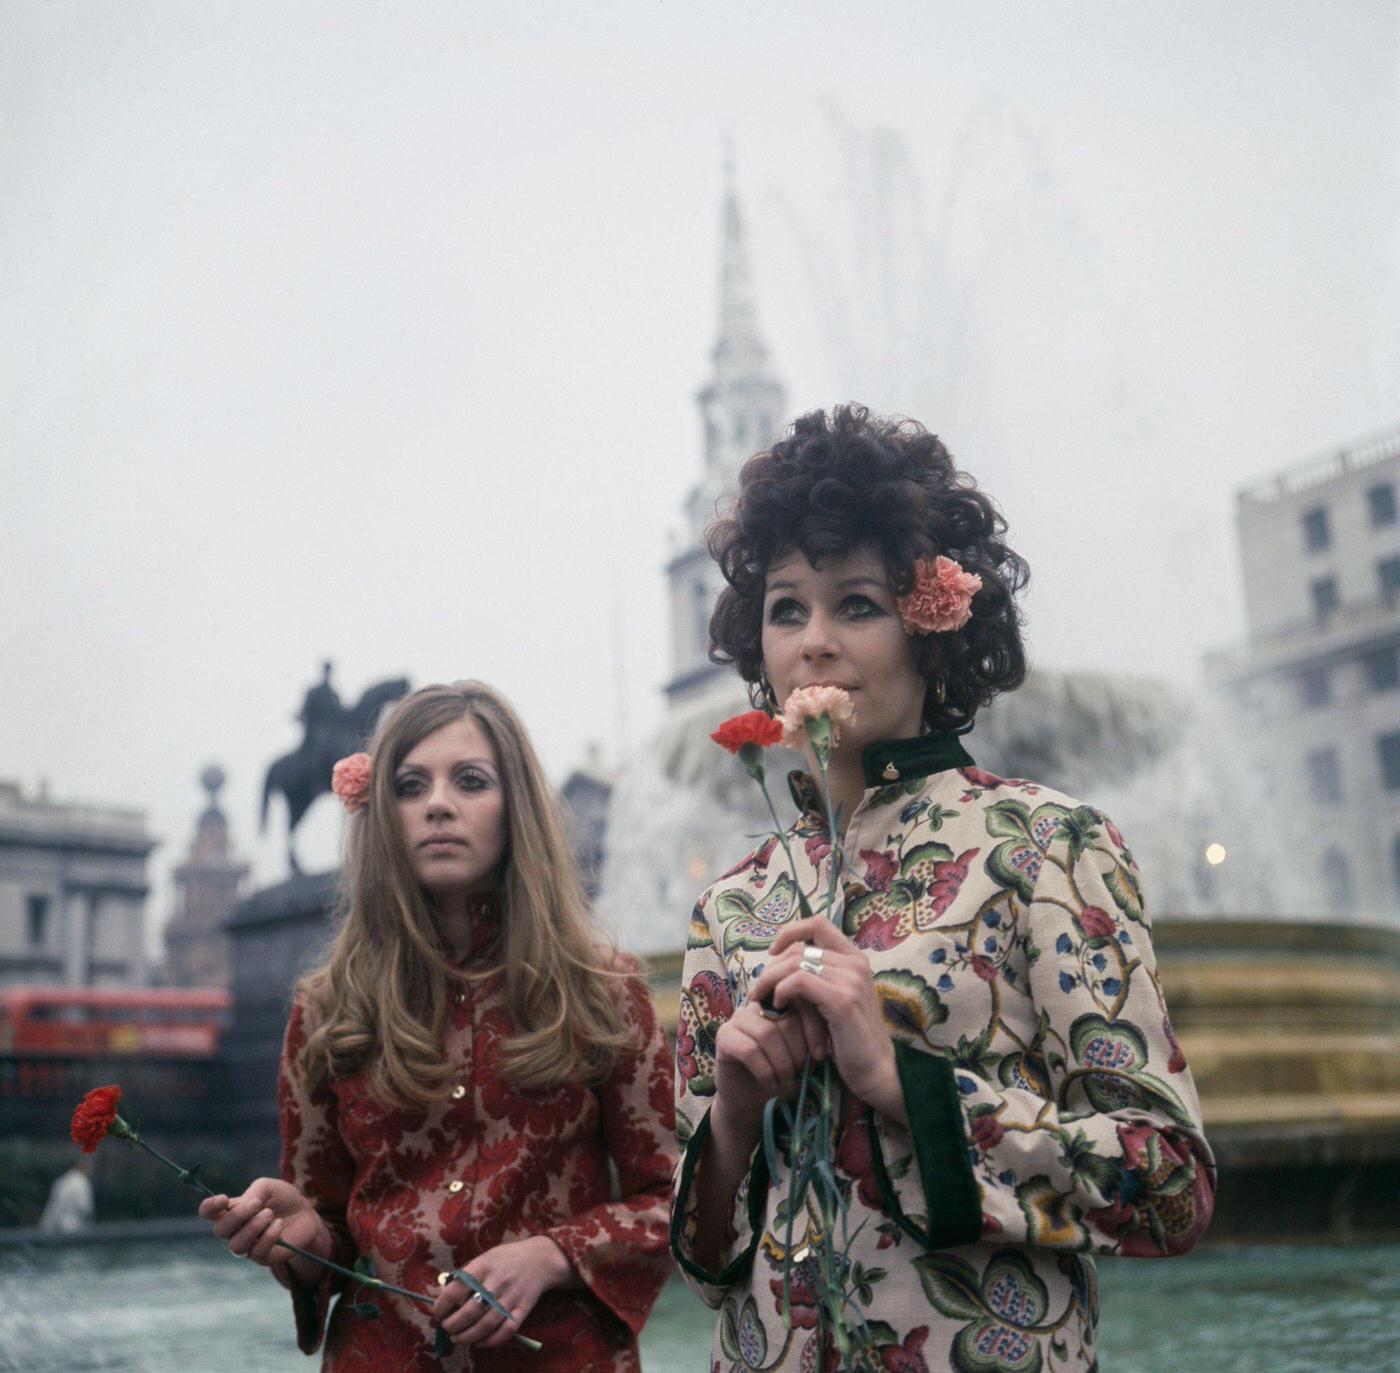 Two young girls dressed in floral print hippie style tunics stand holding flowers in Trafalgar Square, London in November 1967